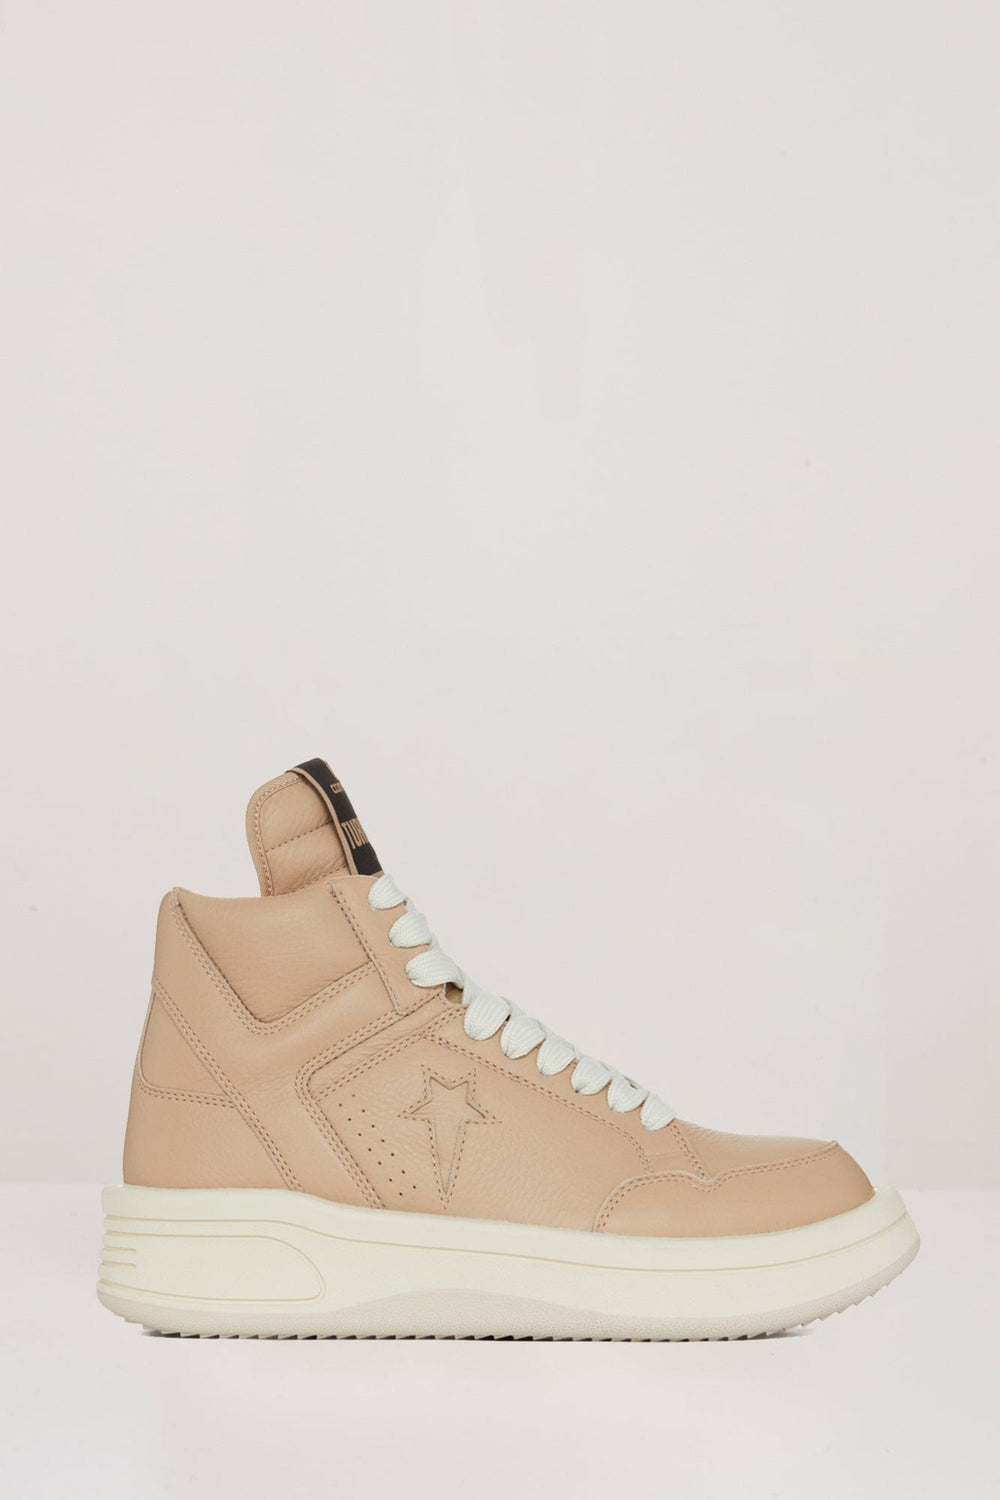 Rick Owens DRKSHDW X CONVERSE Turbowpn in Cave – Antidote Fashion